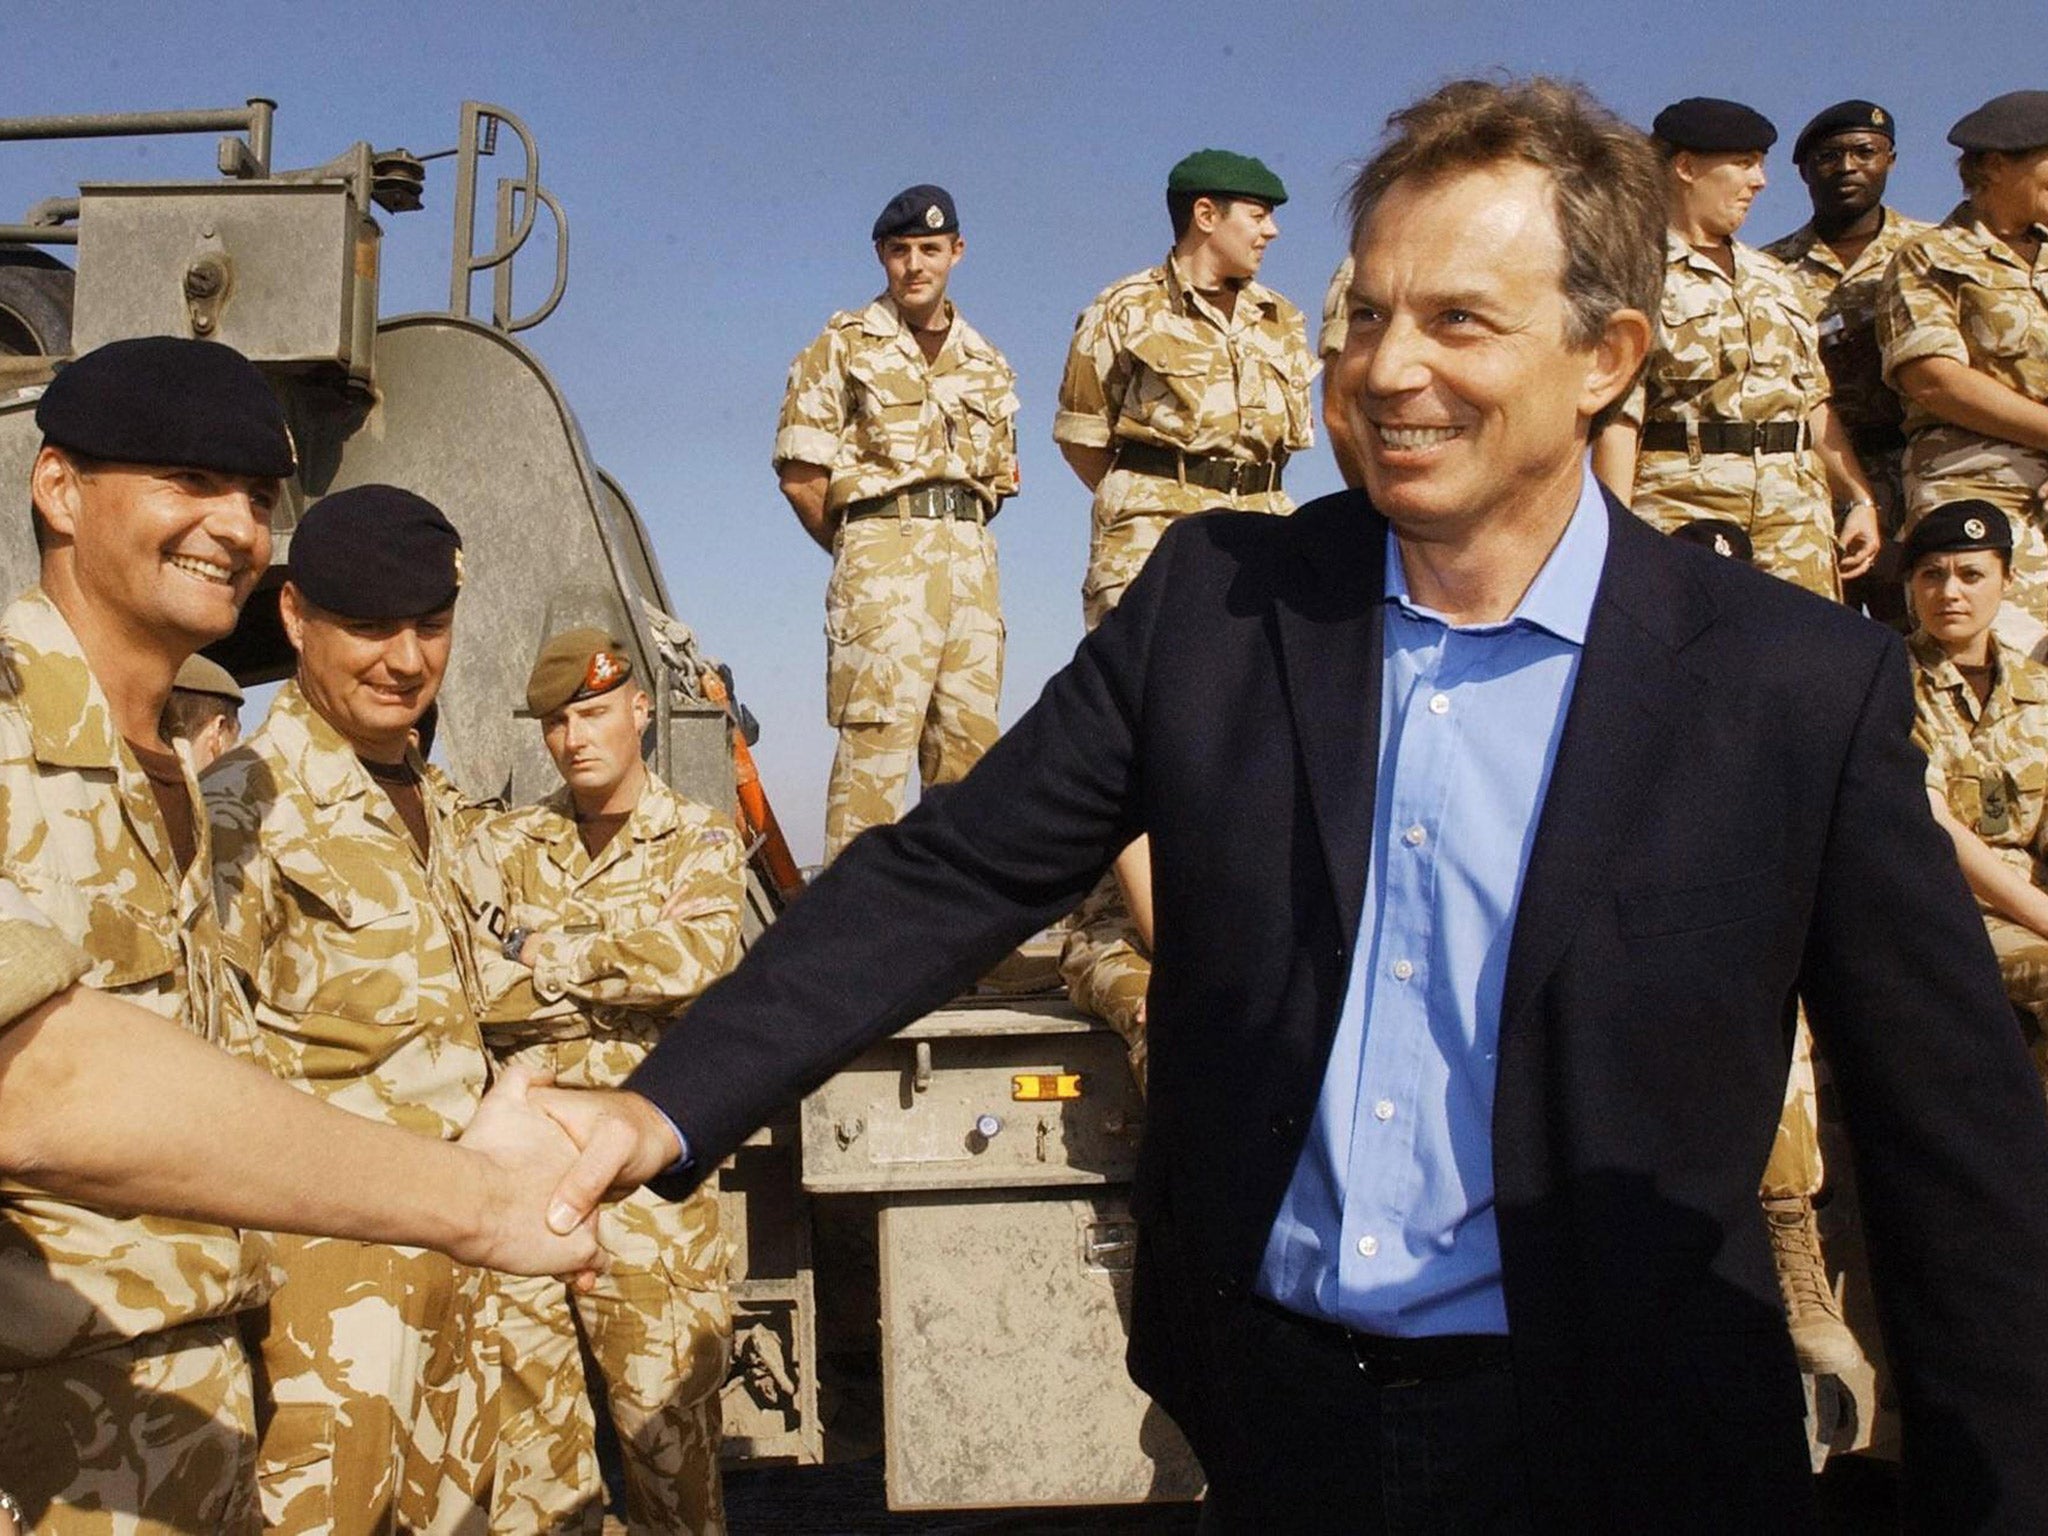 Tony Blair meets troops during a visit to Basra in 2004